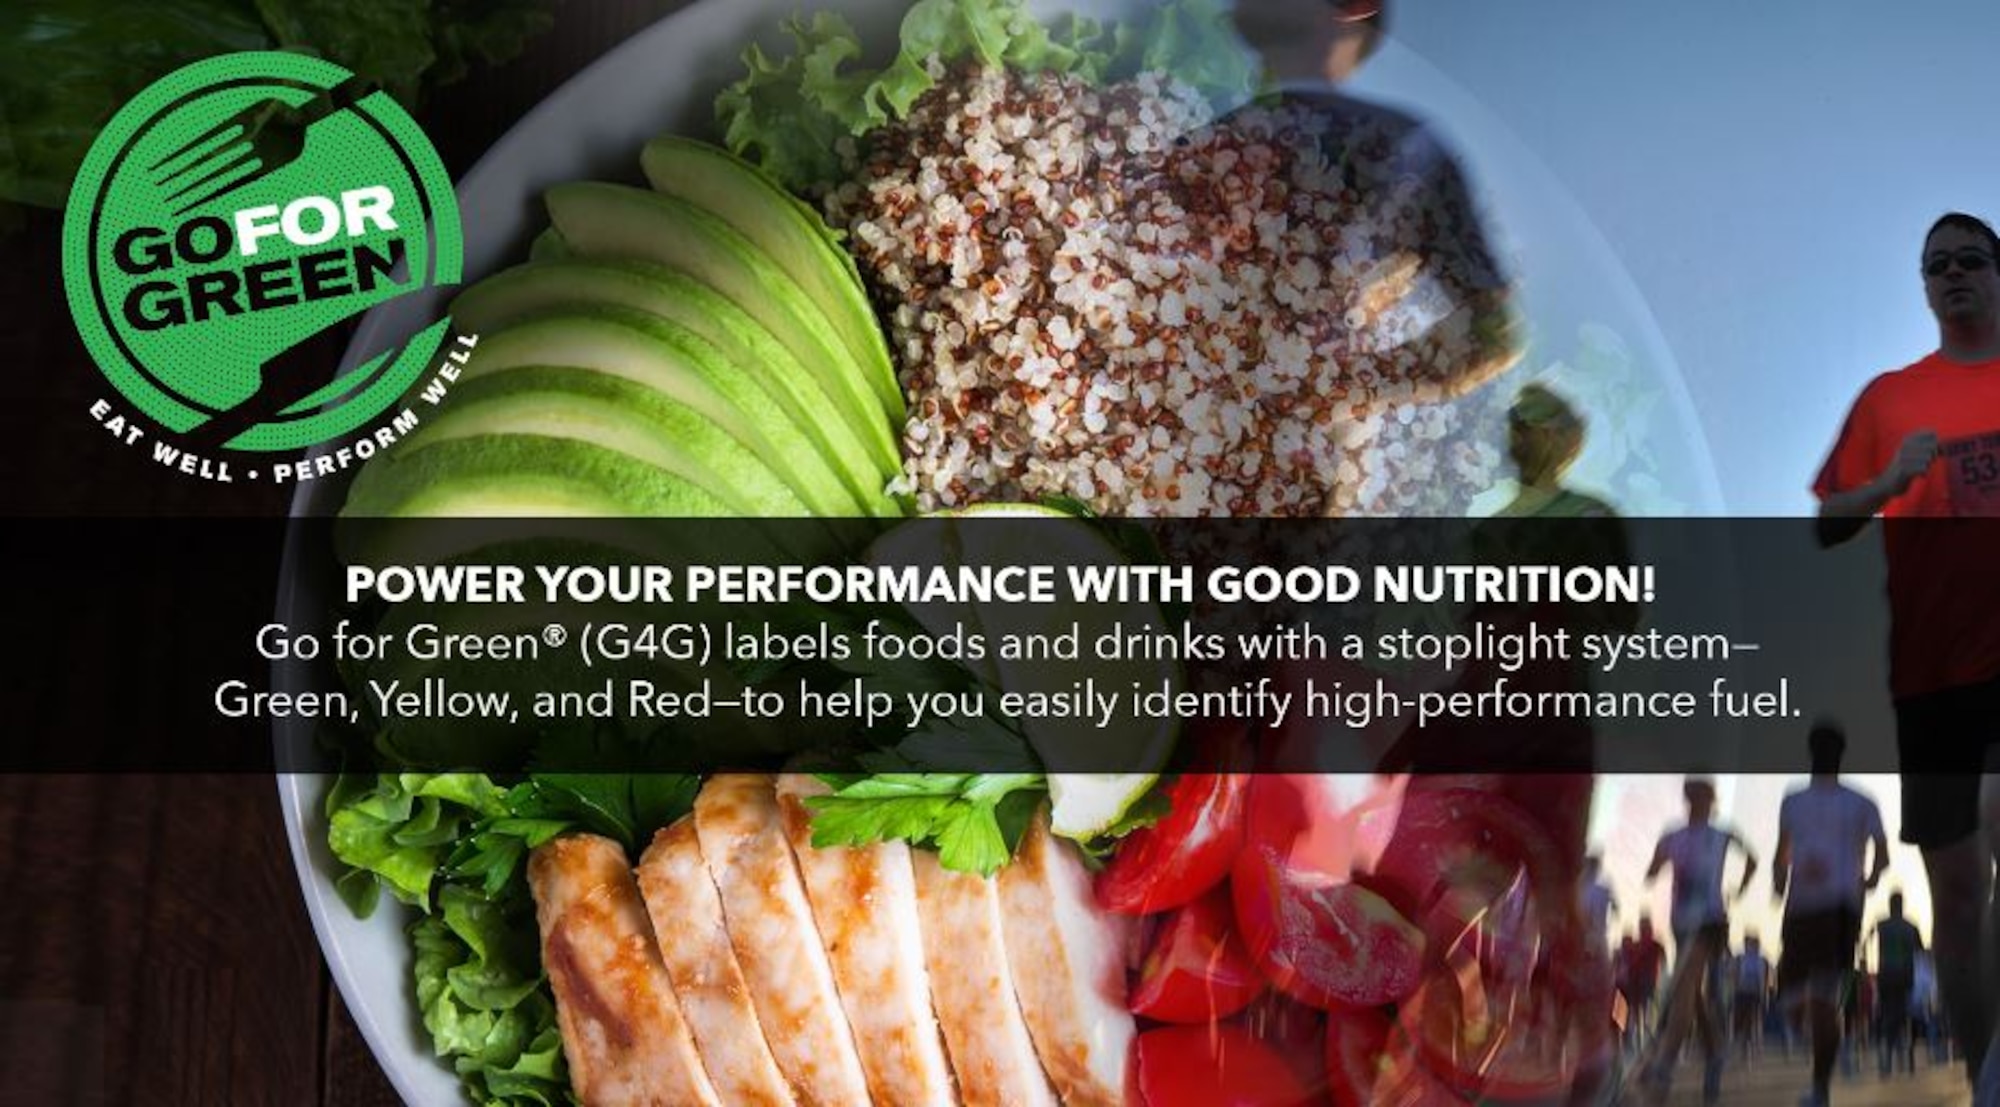 Go For Green Power Your Performance With Good Nutrition